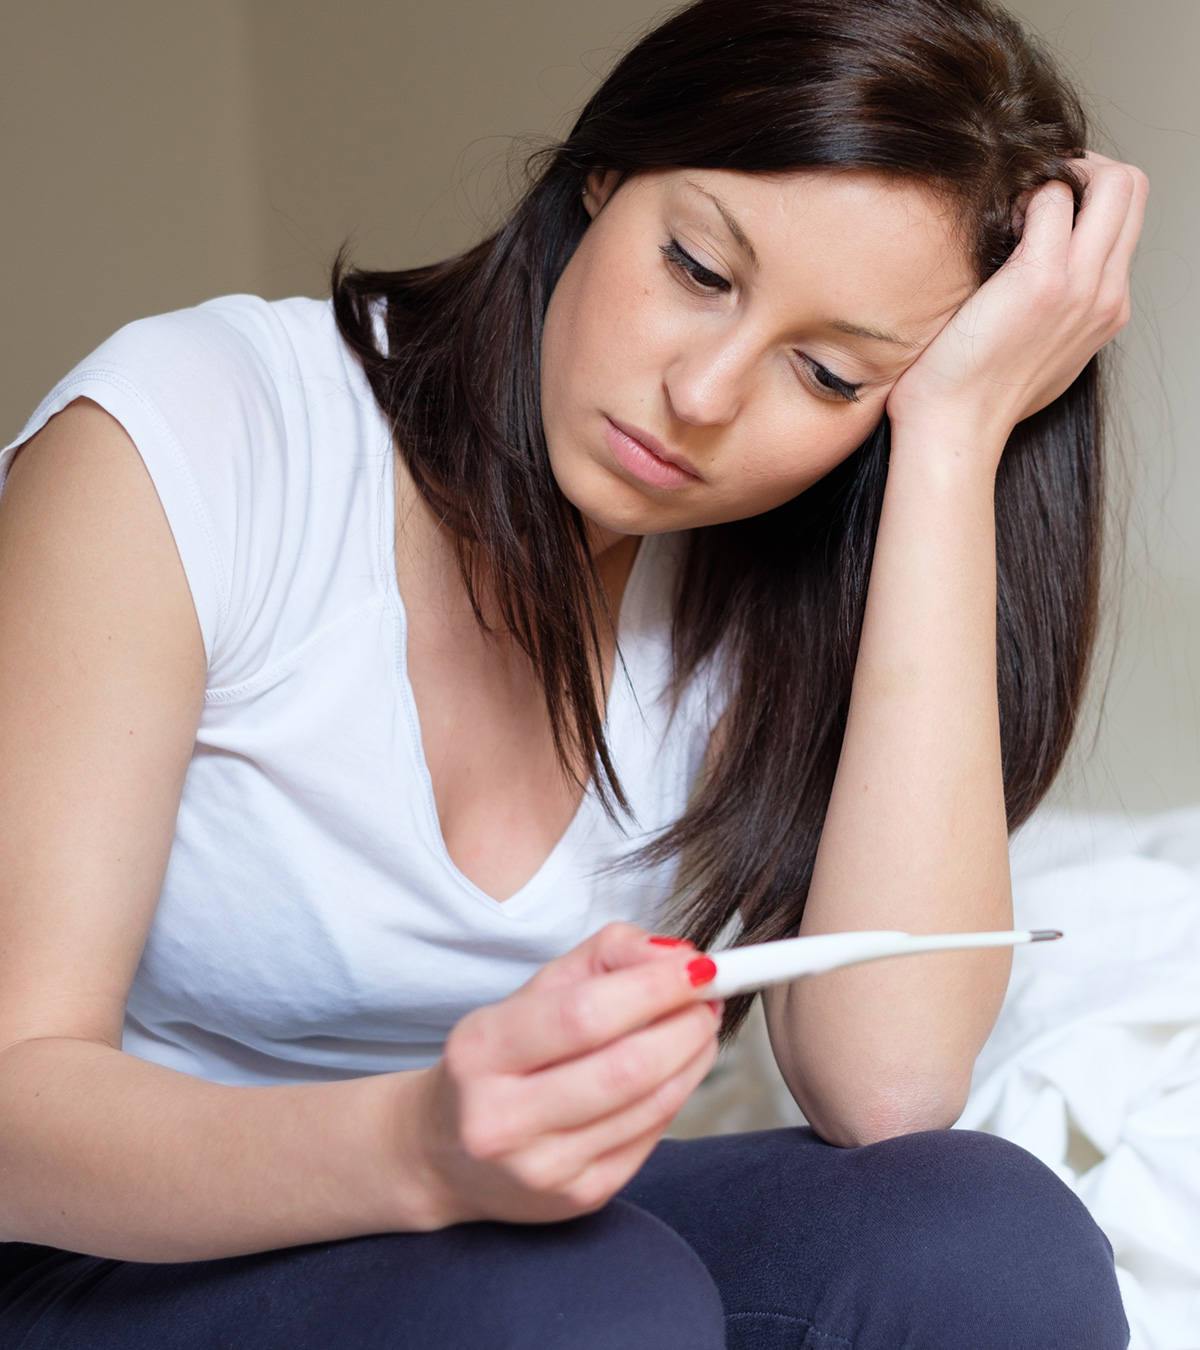 How Safe Are Home Remedies For Abortion And Risks Involved